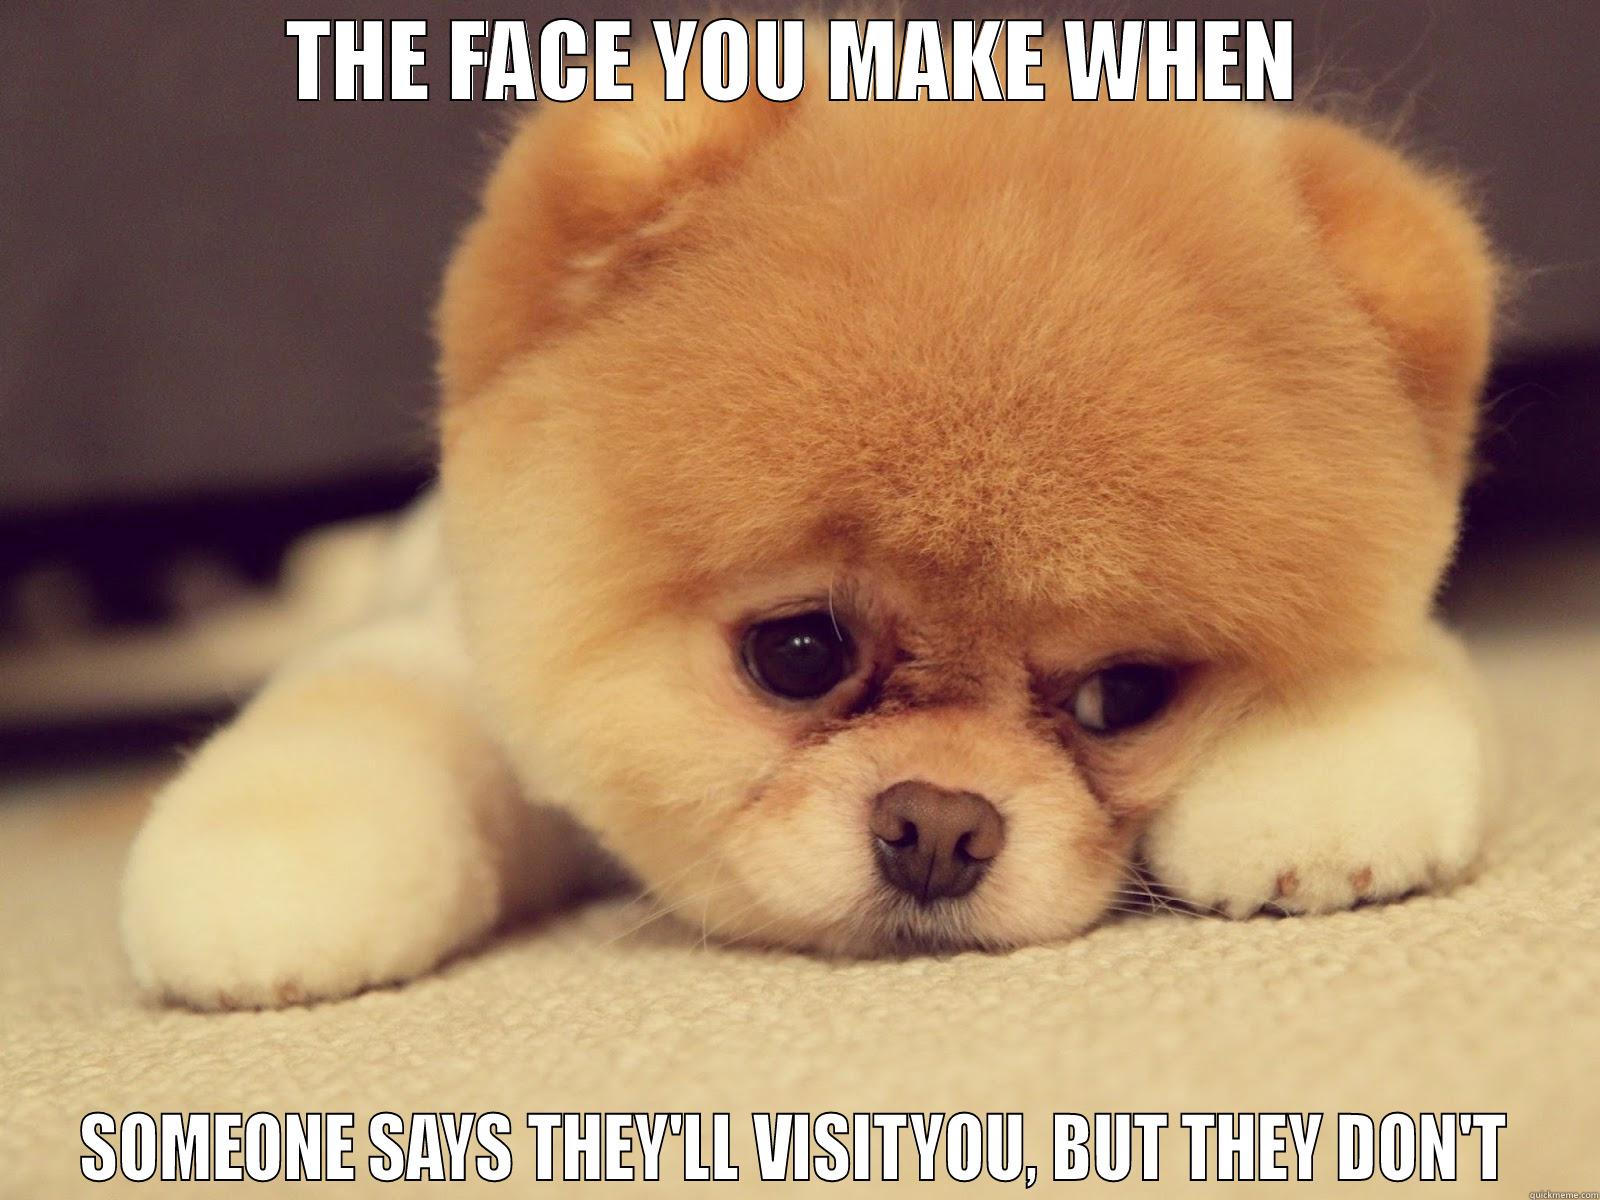 Sad Puppy - THE FACE YOU MAKE WHEN SOMEONE SAYS THEY'LL VISITYOU, BUT THEY DON'T Misc